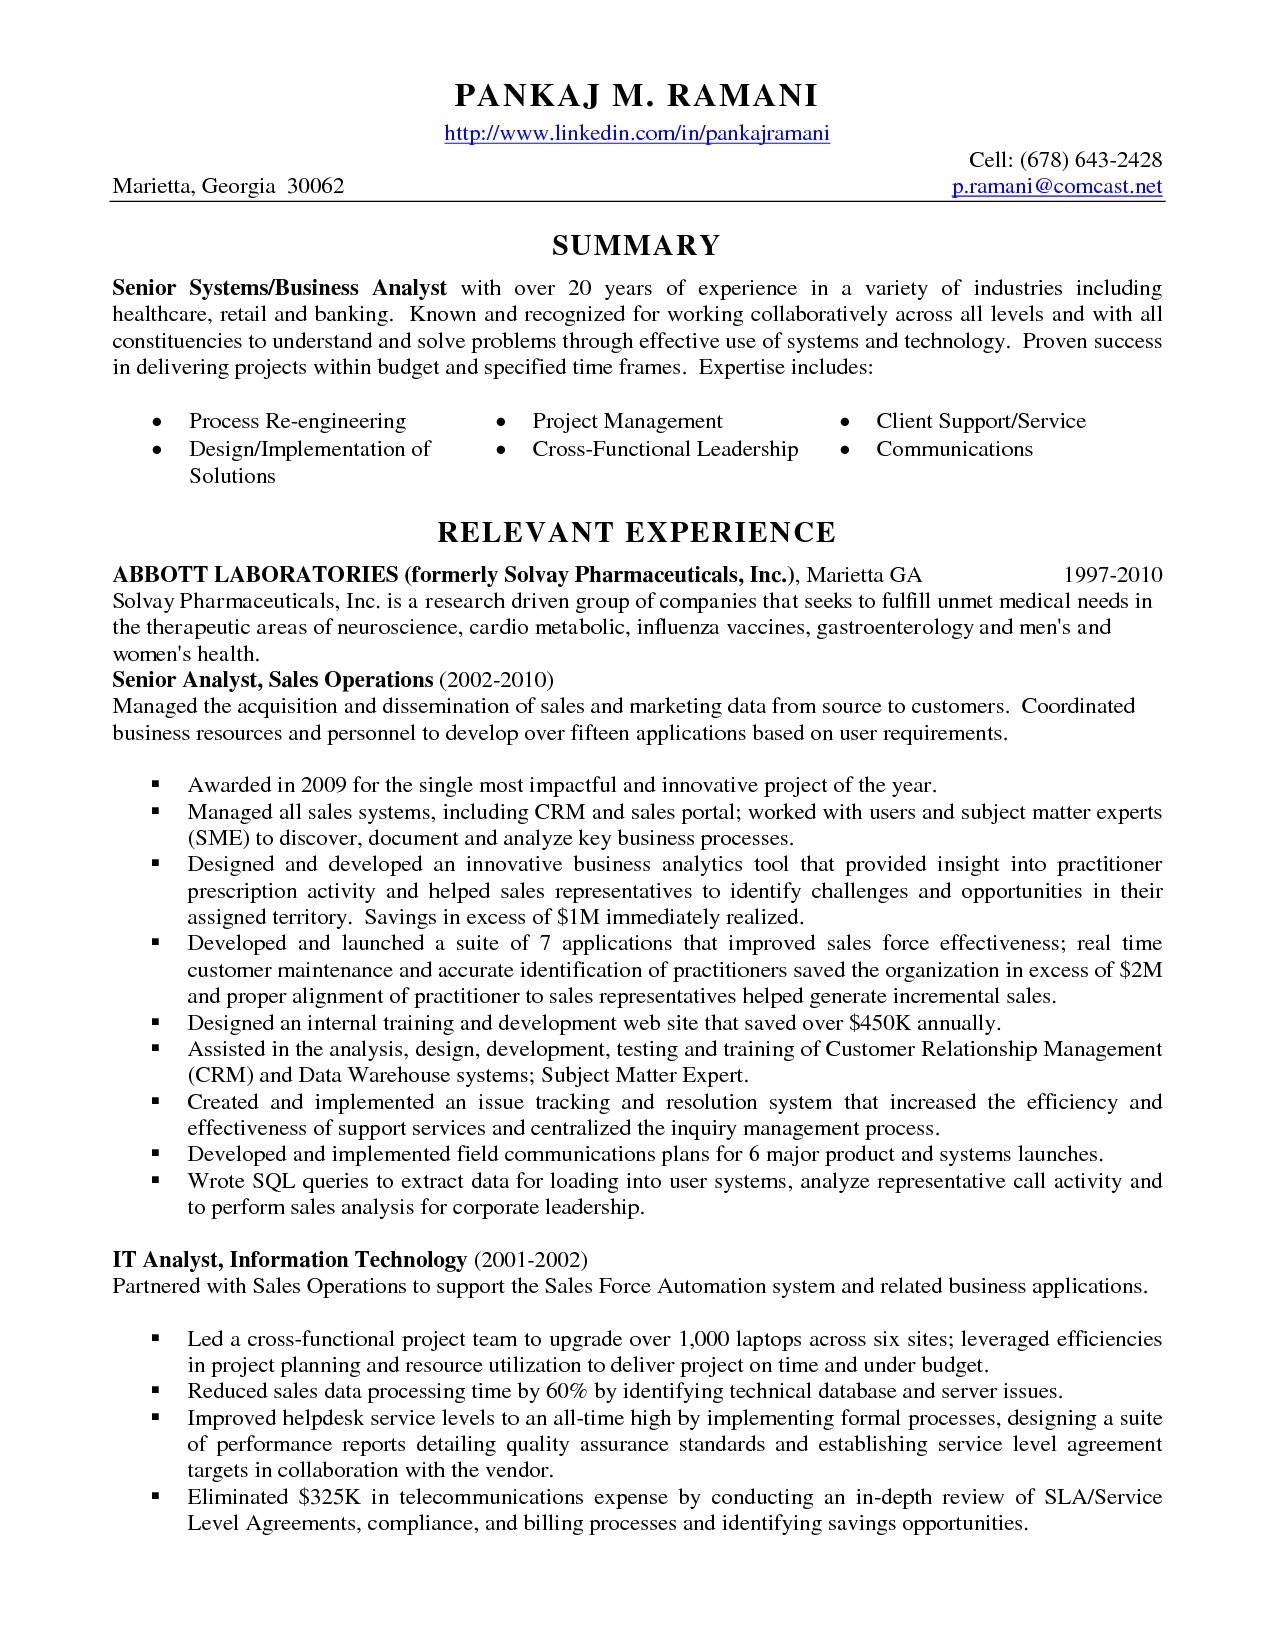 resume for business analyst in banking domain